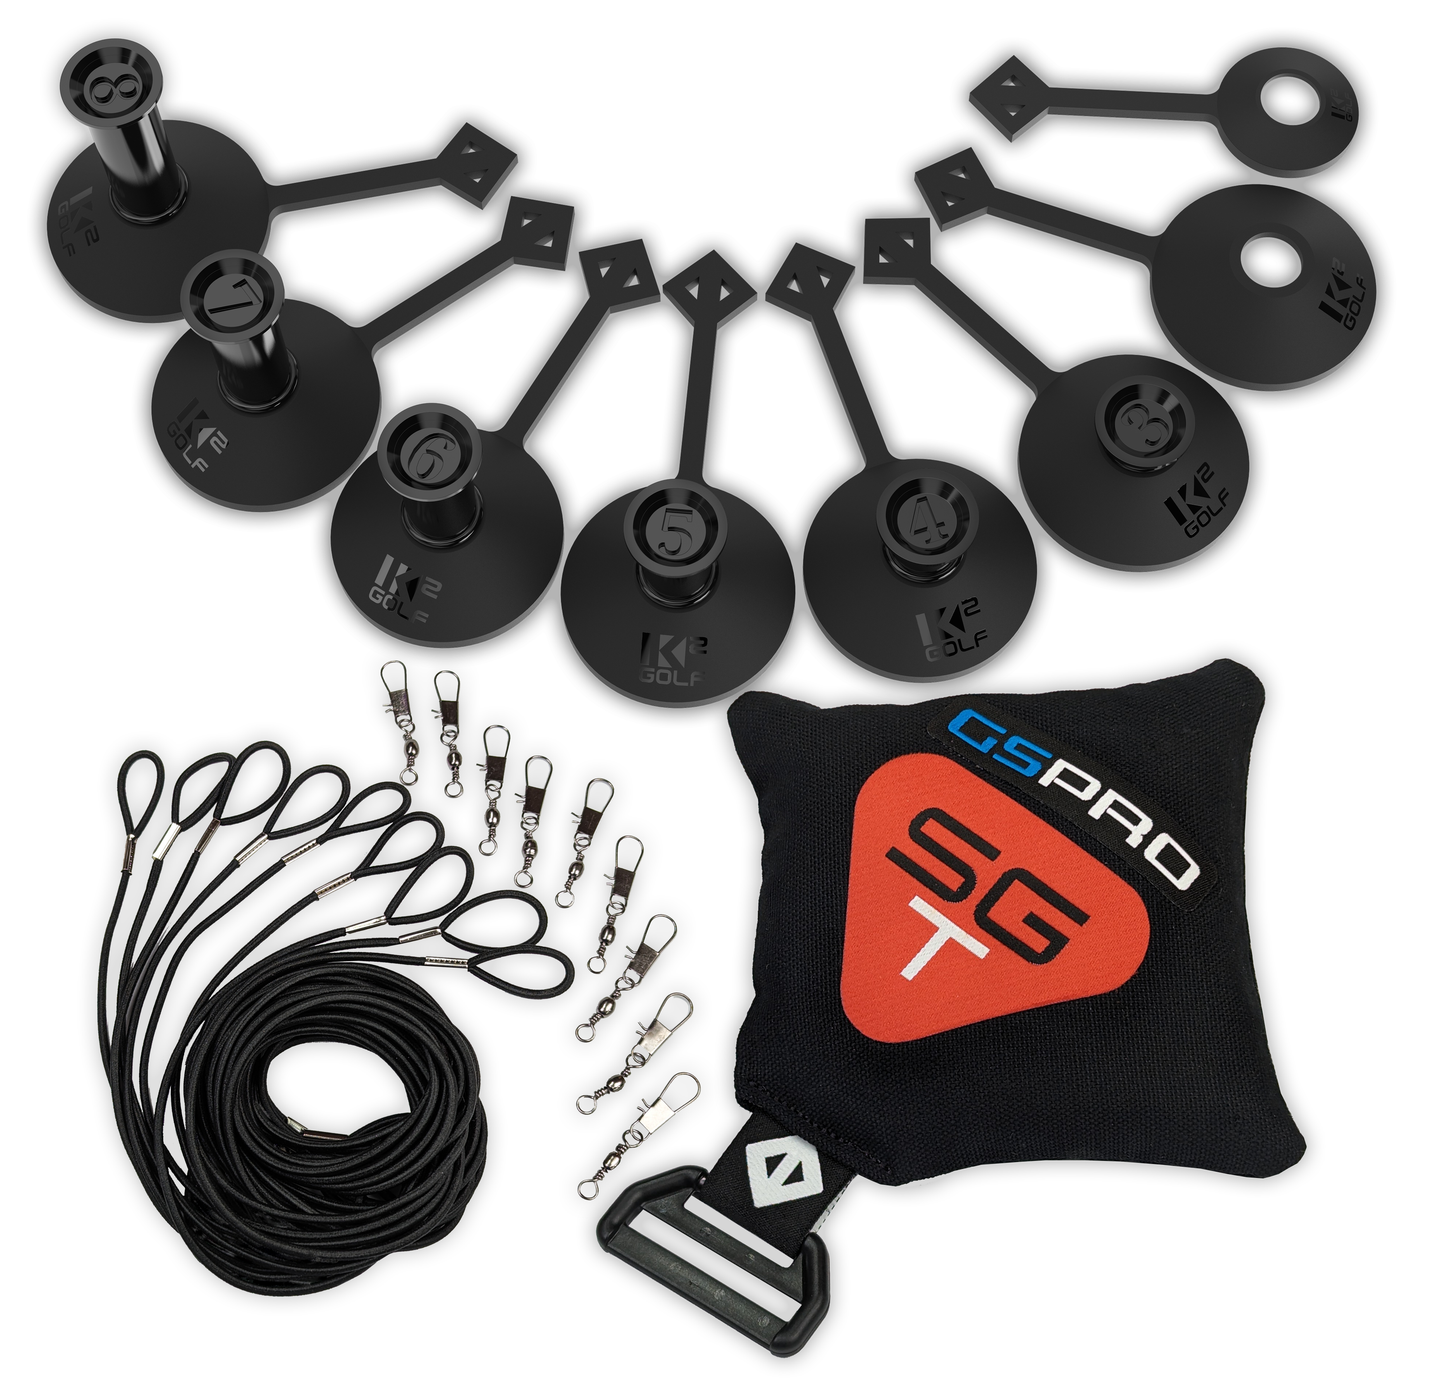 BUNDLE STANDARD SET (#1 - #8) & TETHER PACK (Anchor, 9 Bungee Cords and 9 Swivel Clips)